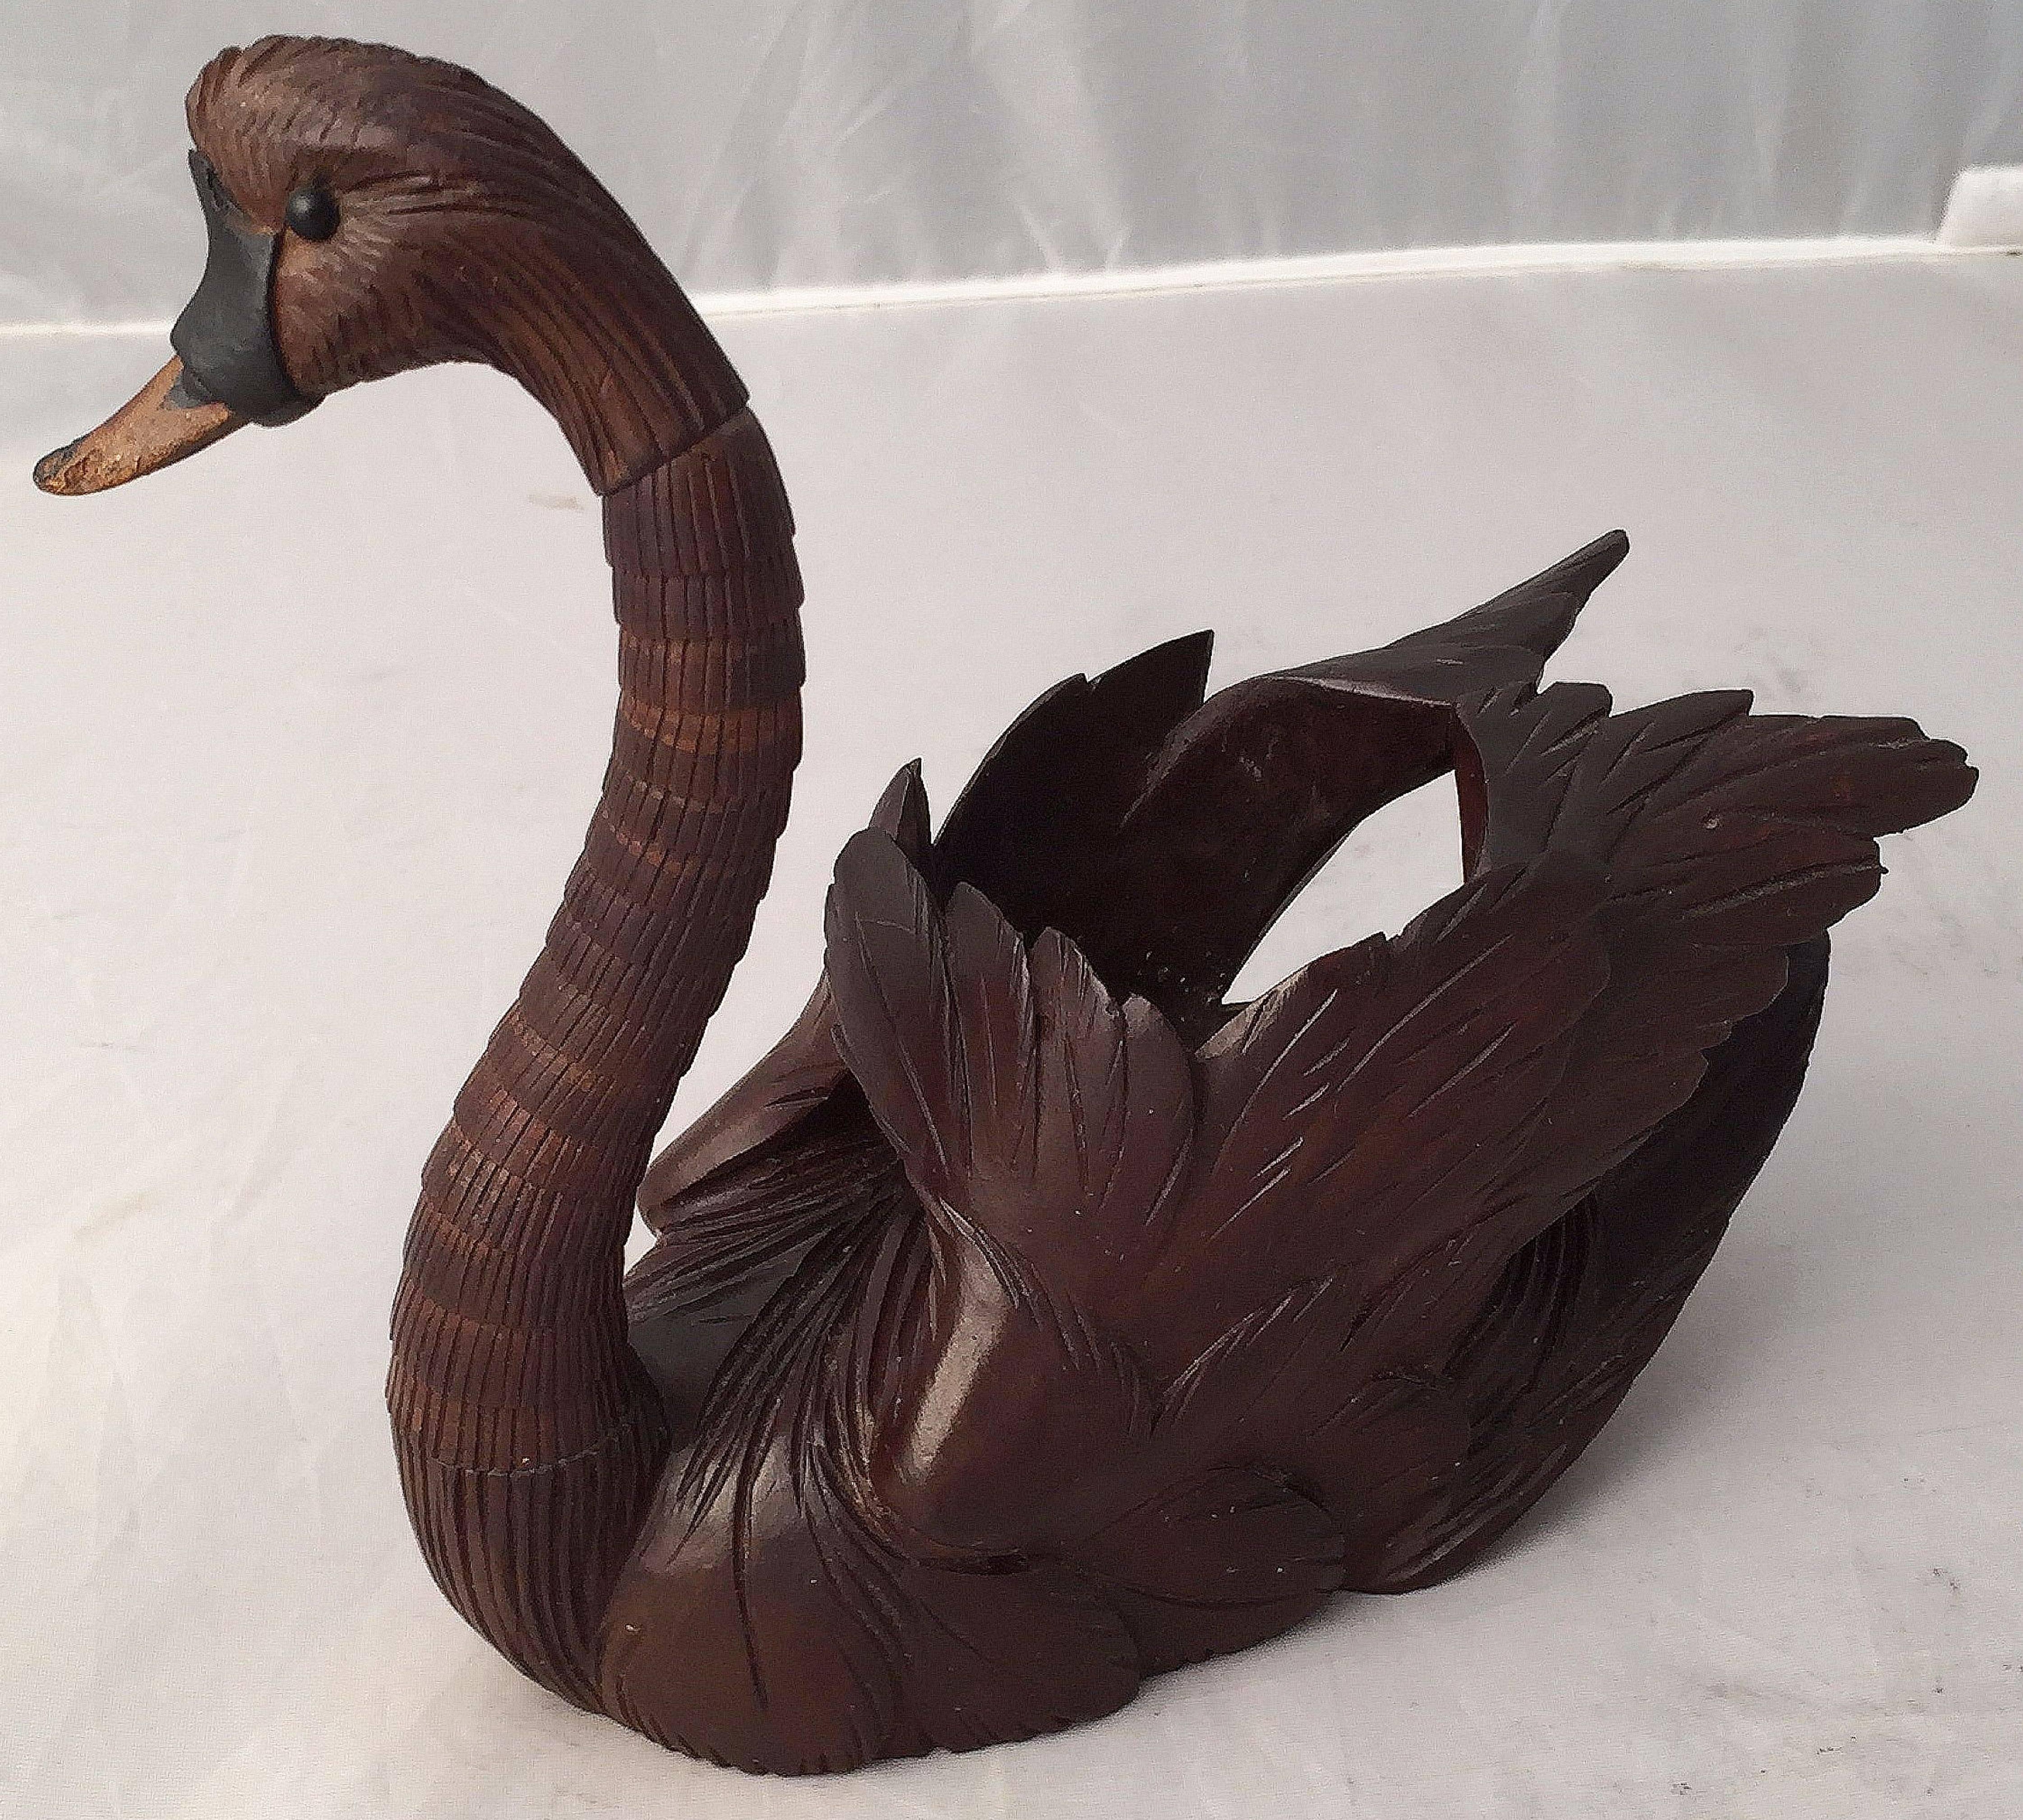 A fine Black Forest swan figure of carved linden wood from Switzerland, featuring an articulated neck, allowing the head to swivel in 360 degrees, so to create a variety of poses.